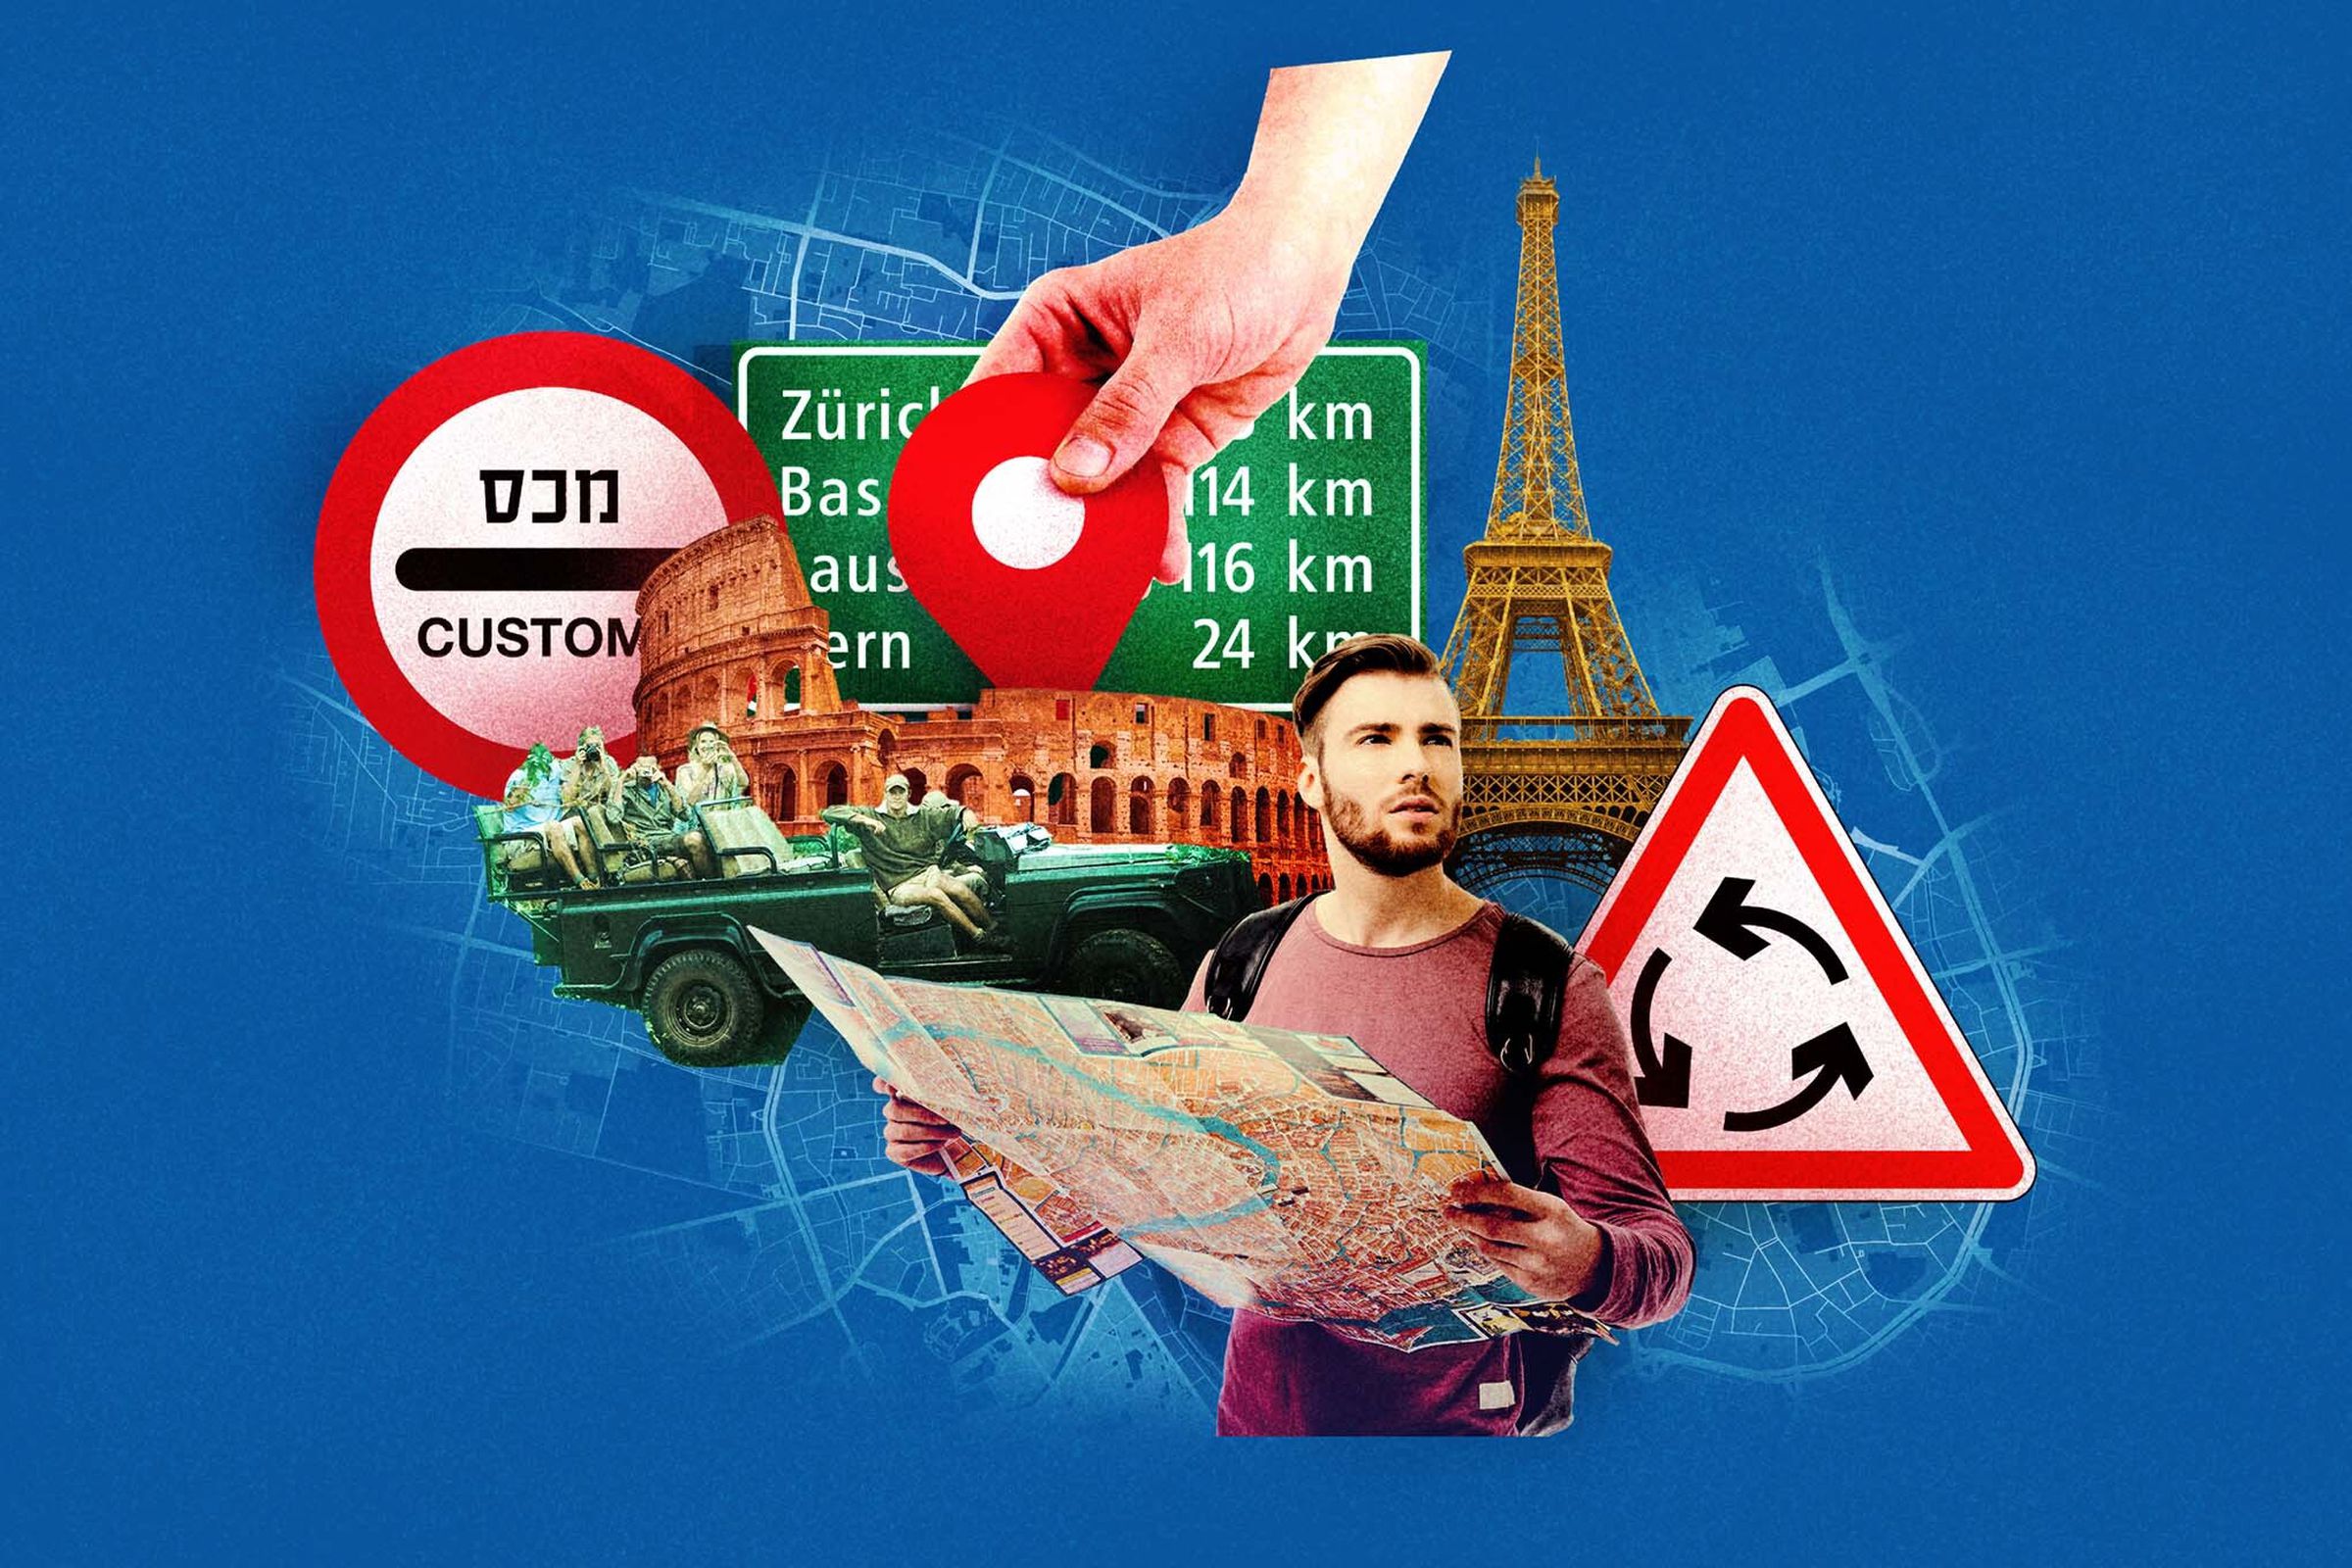 A collage of famous landmarks (Eiffel Tower, the Colosseum), confusing signage, and maps.